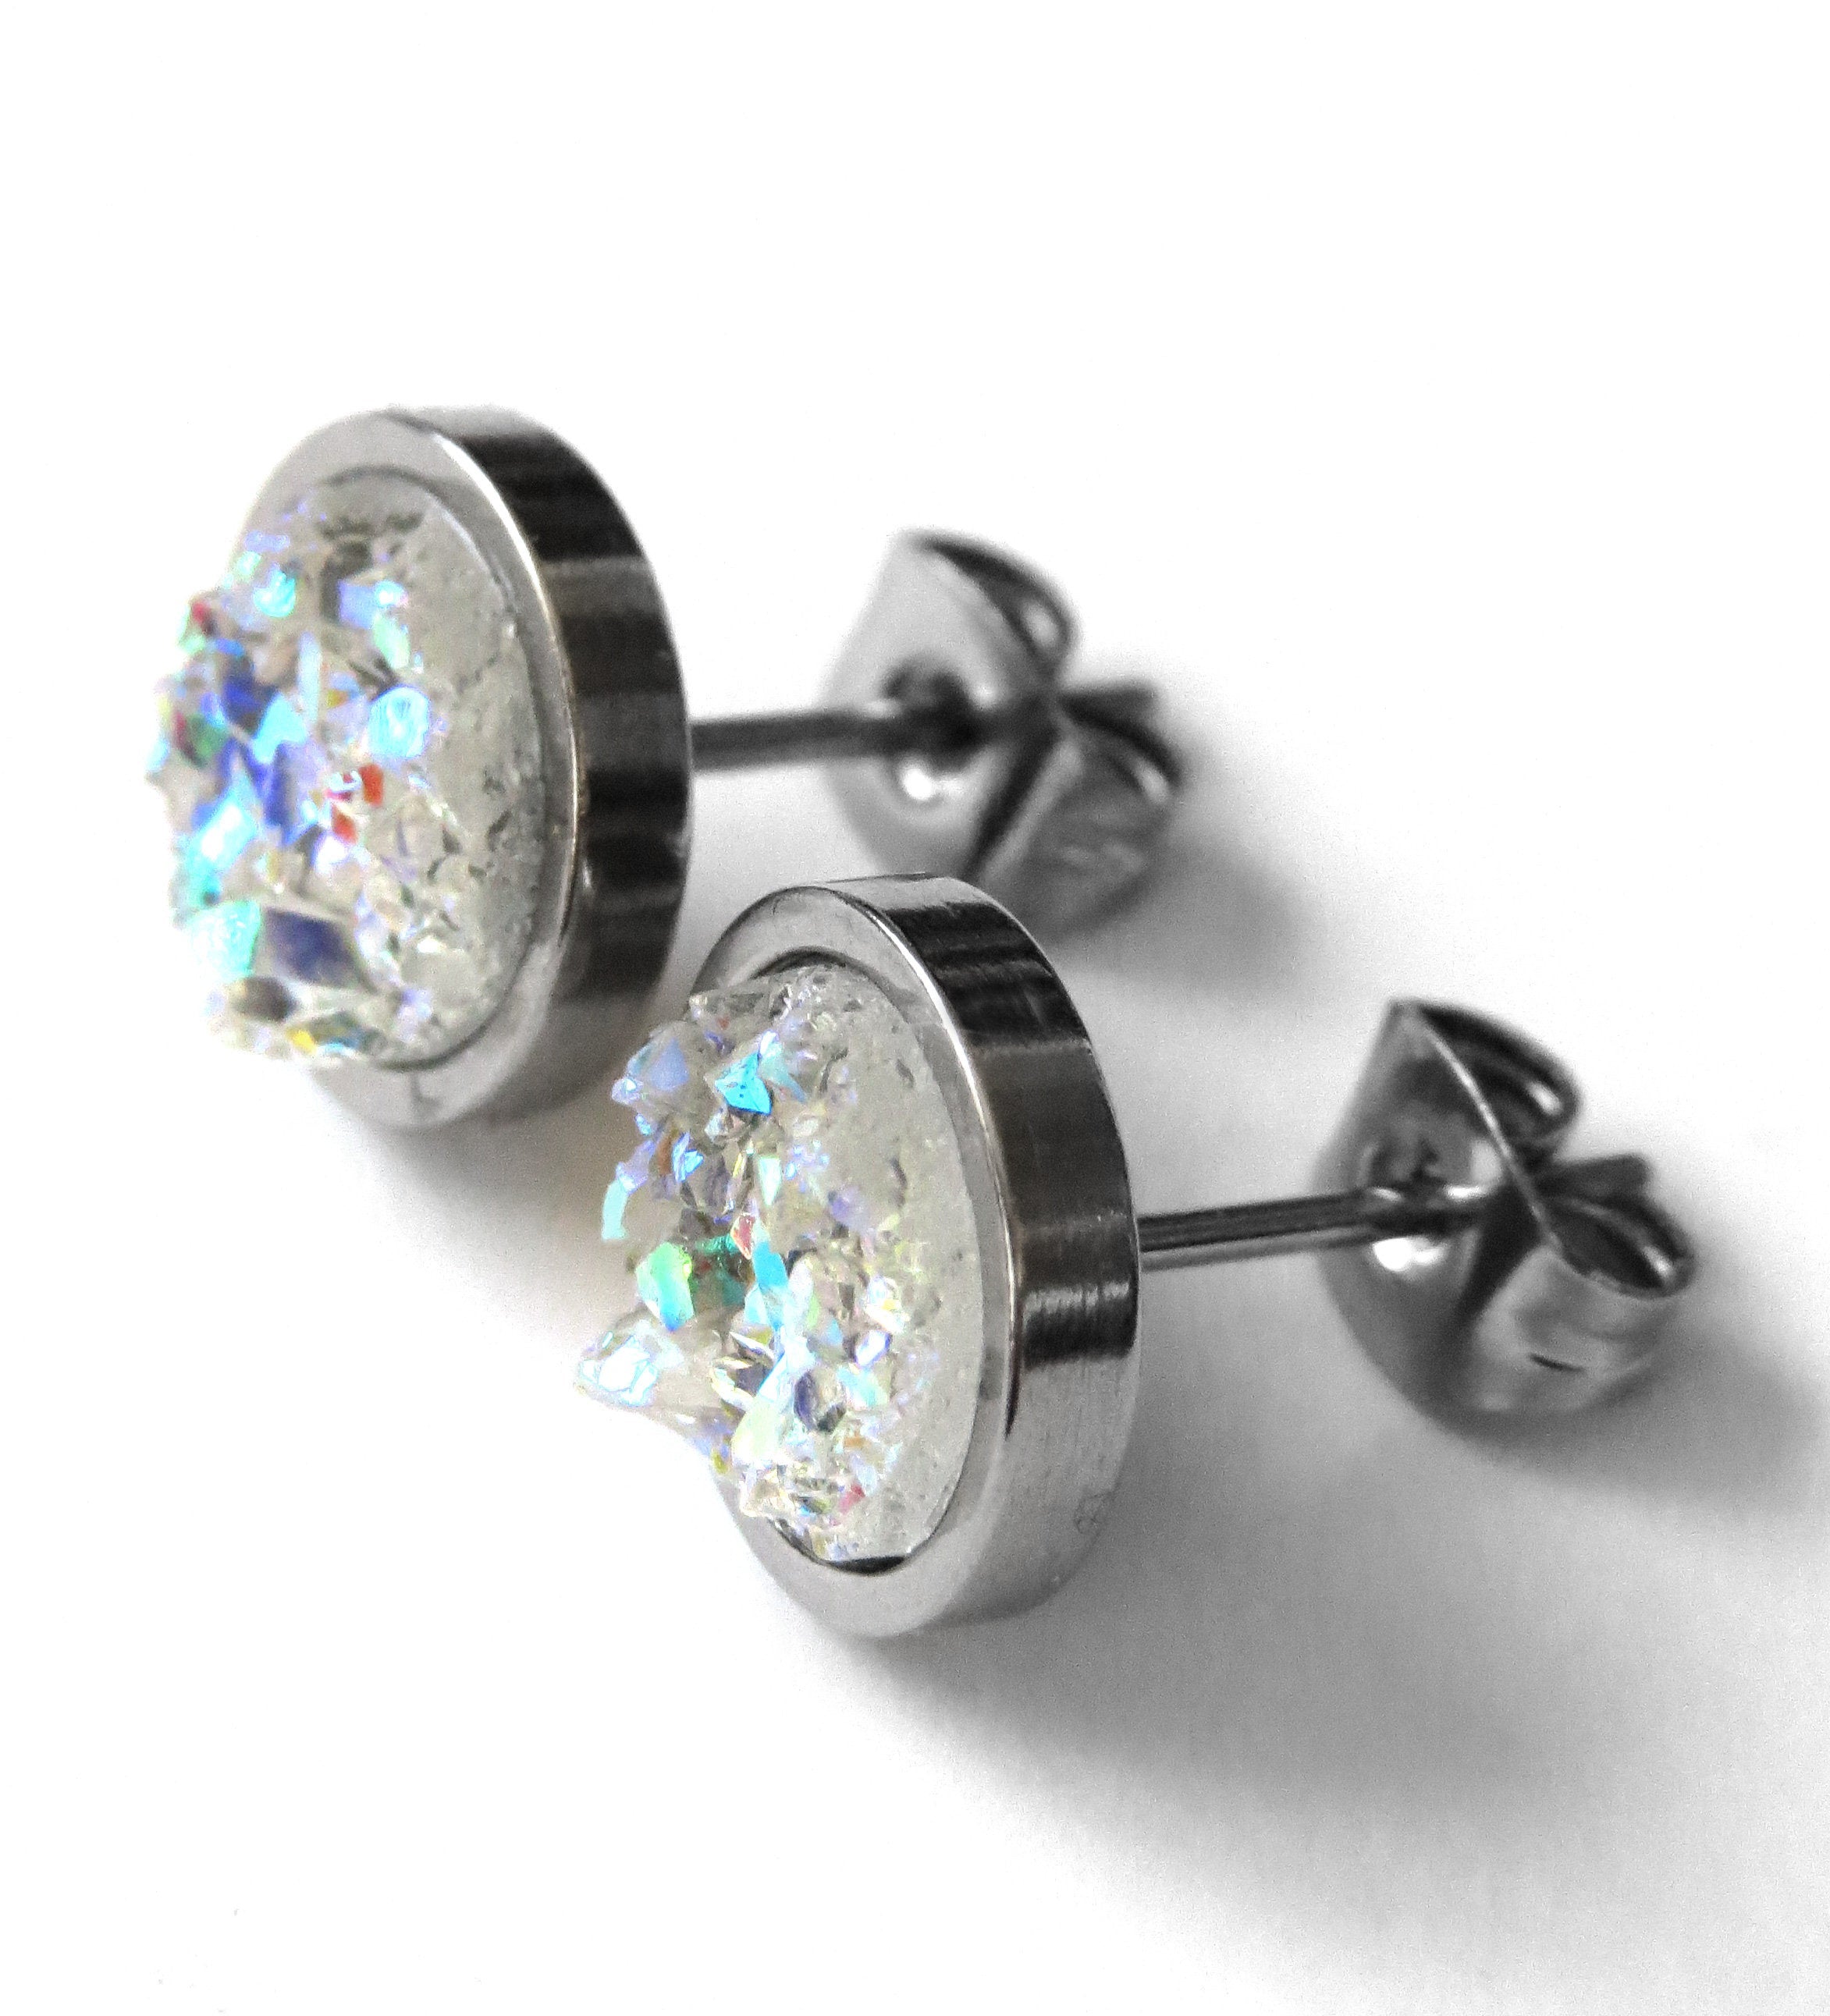 AURORA ICE - Shimmer Iridescent Stud Earrings with Simulated Druzy - Unisex Womens Large Stud Earrings - Modern Jewelry